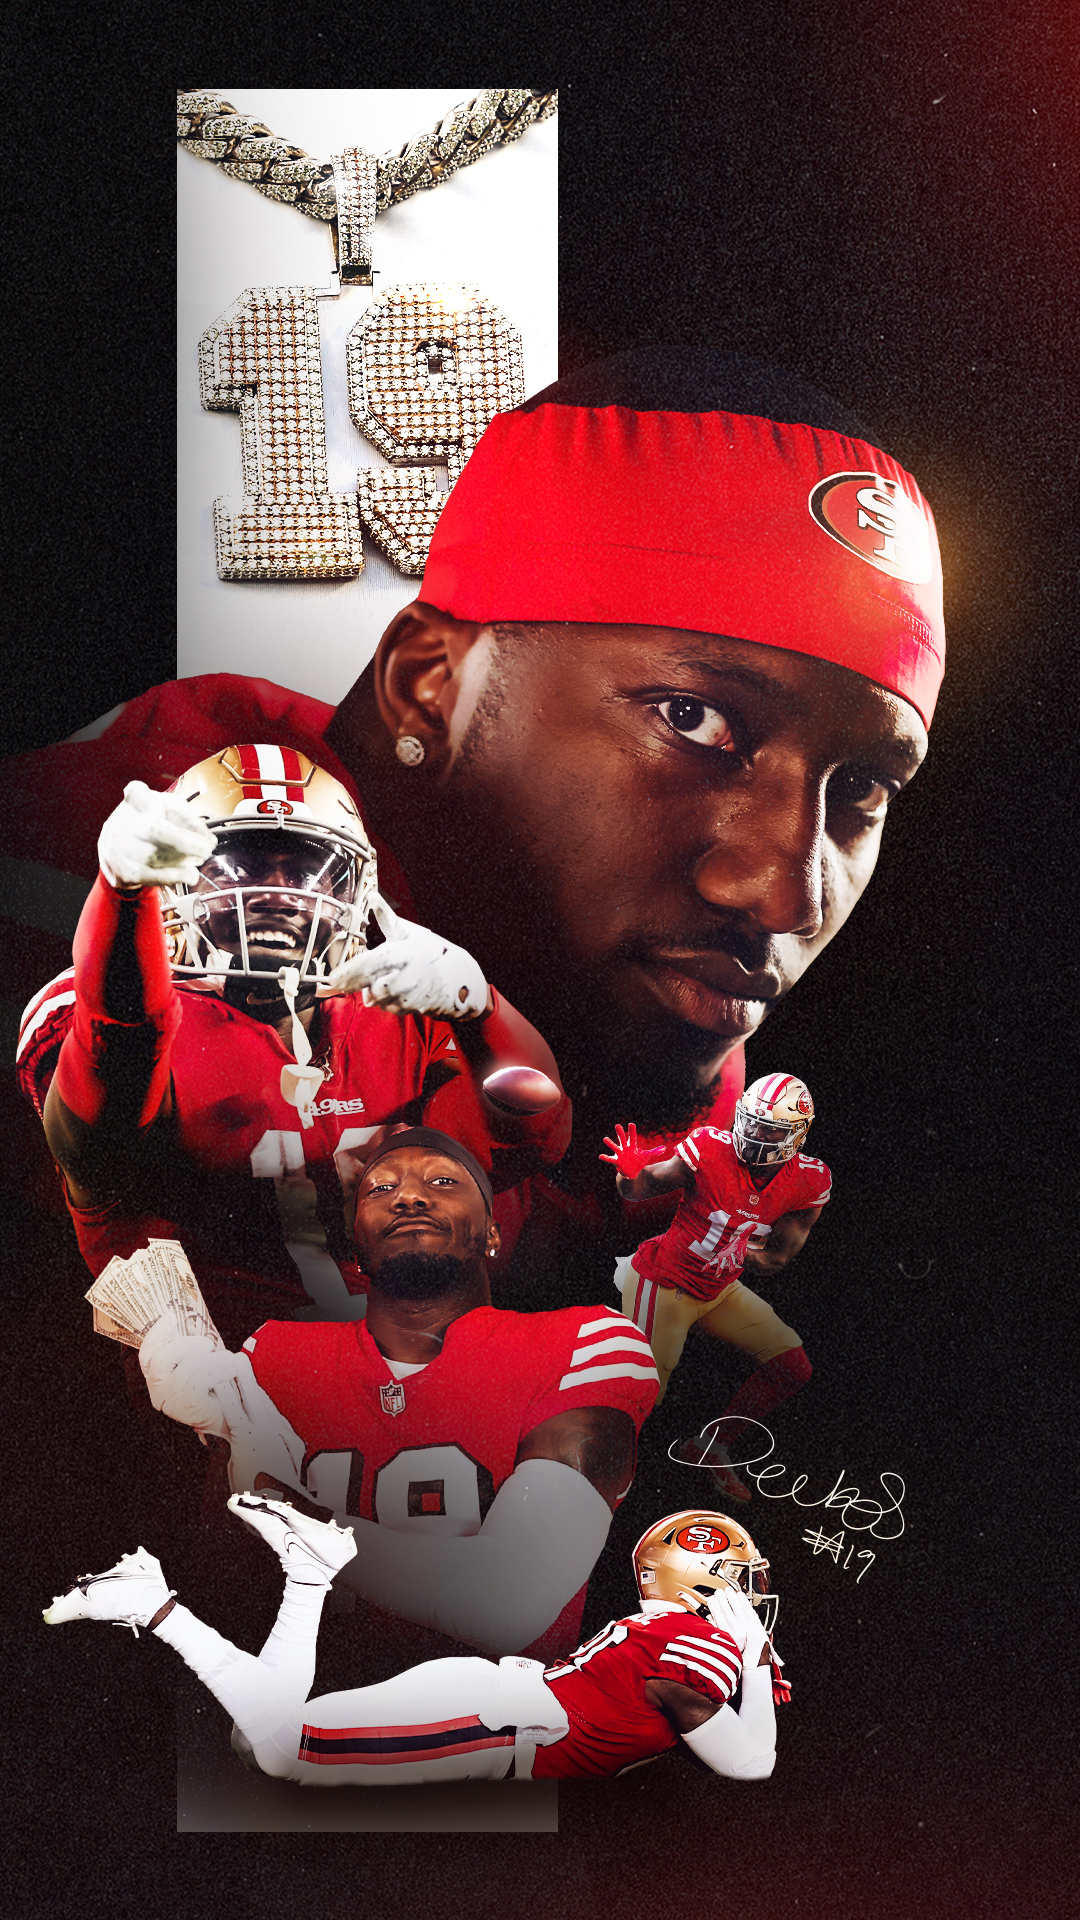 49er radio 49ers wallpapers 49ers images 49ers hd wallpapers 49ers 